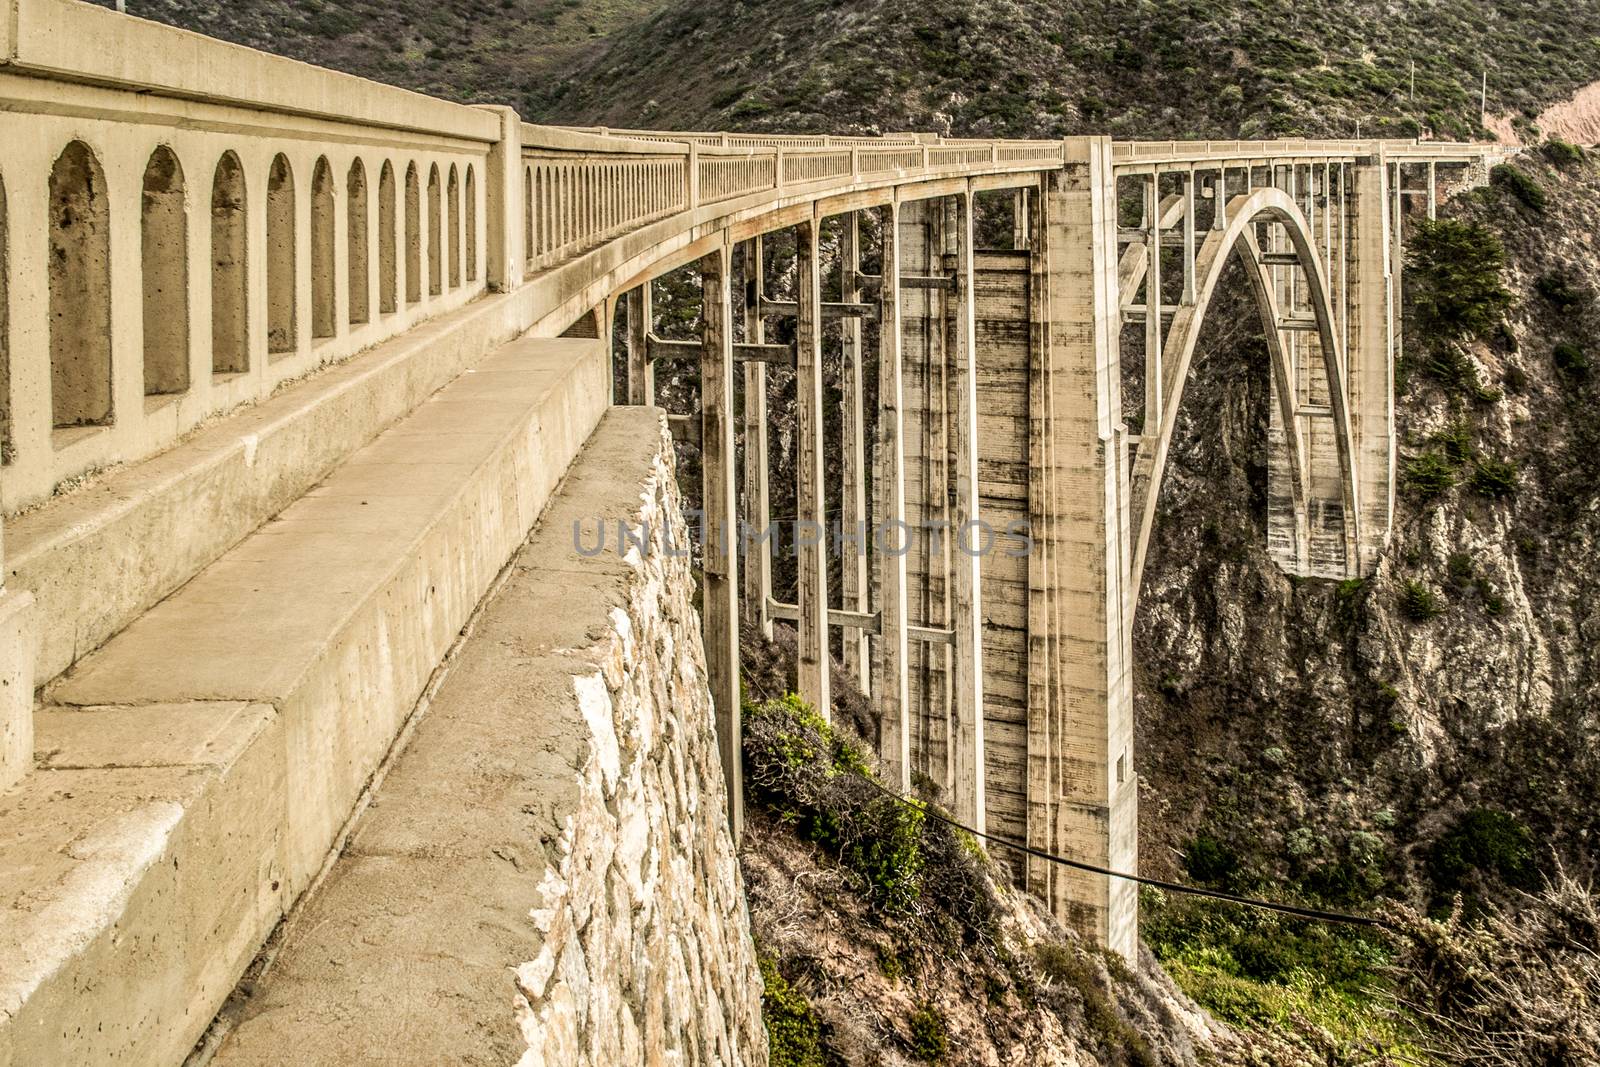 close-up, detailed and side view of the Bixby Bridge on Coastal and Pacific Highway one, Big Sur by kb79